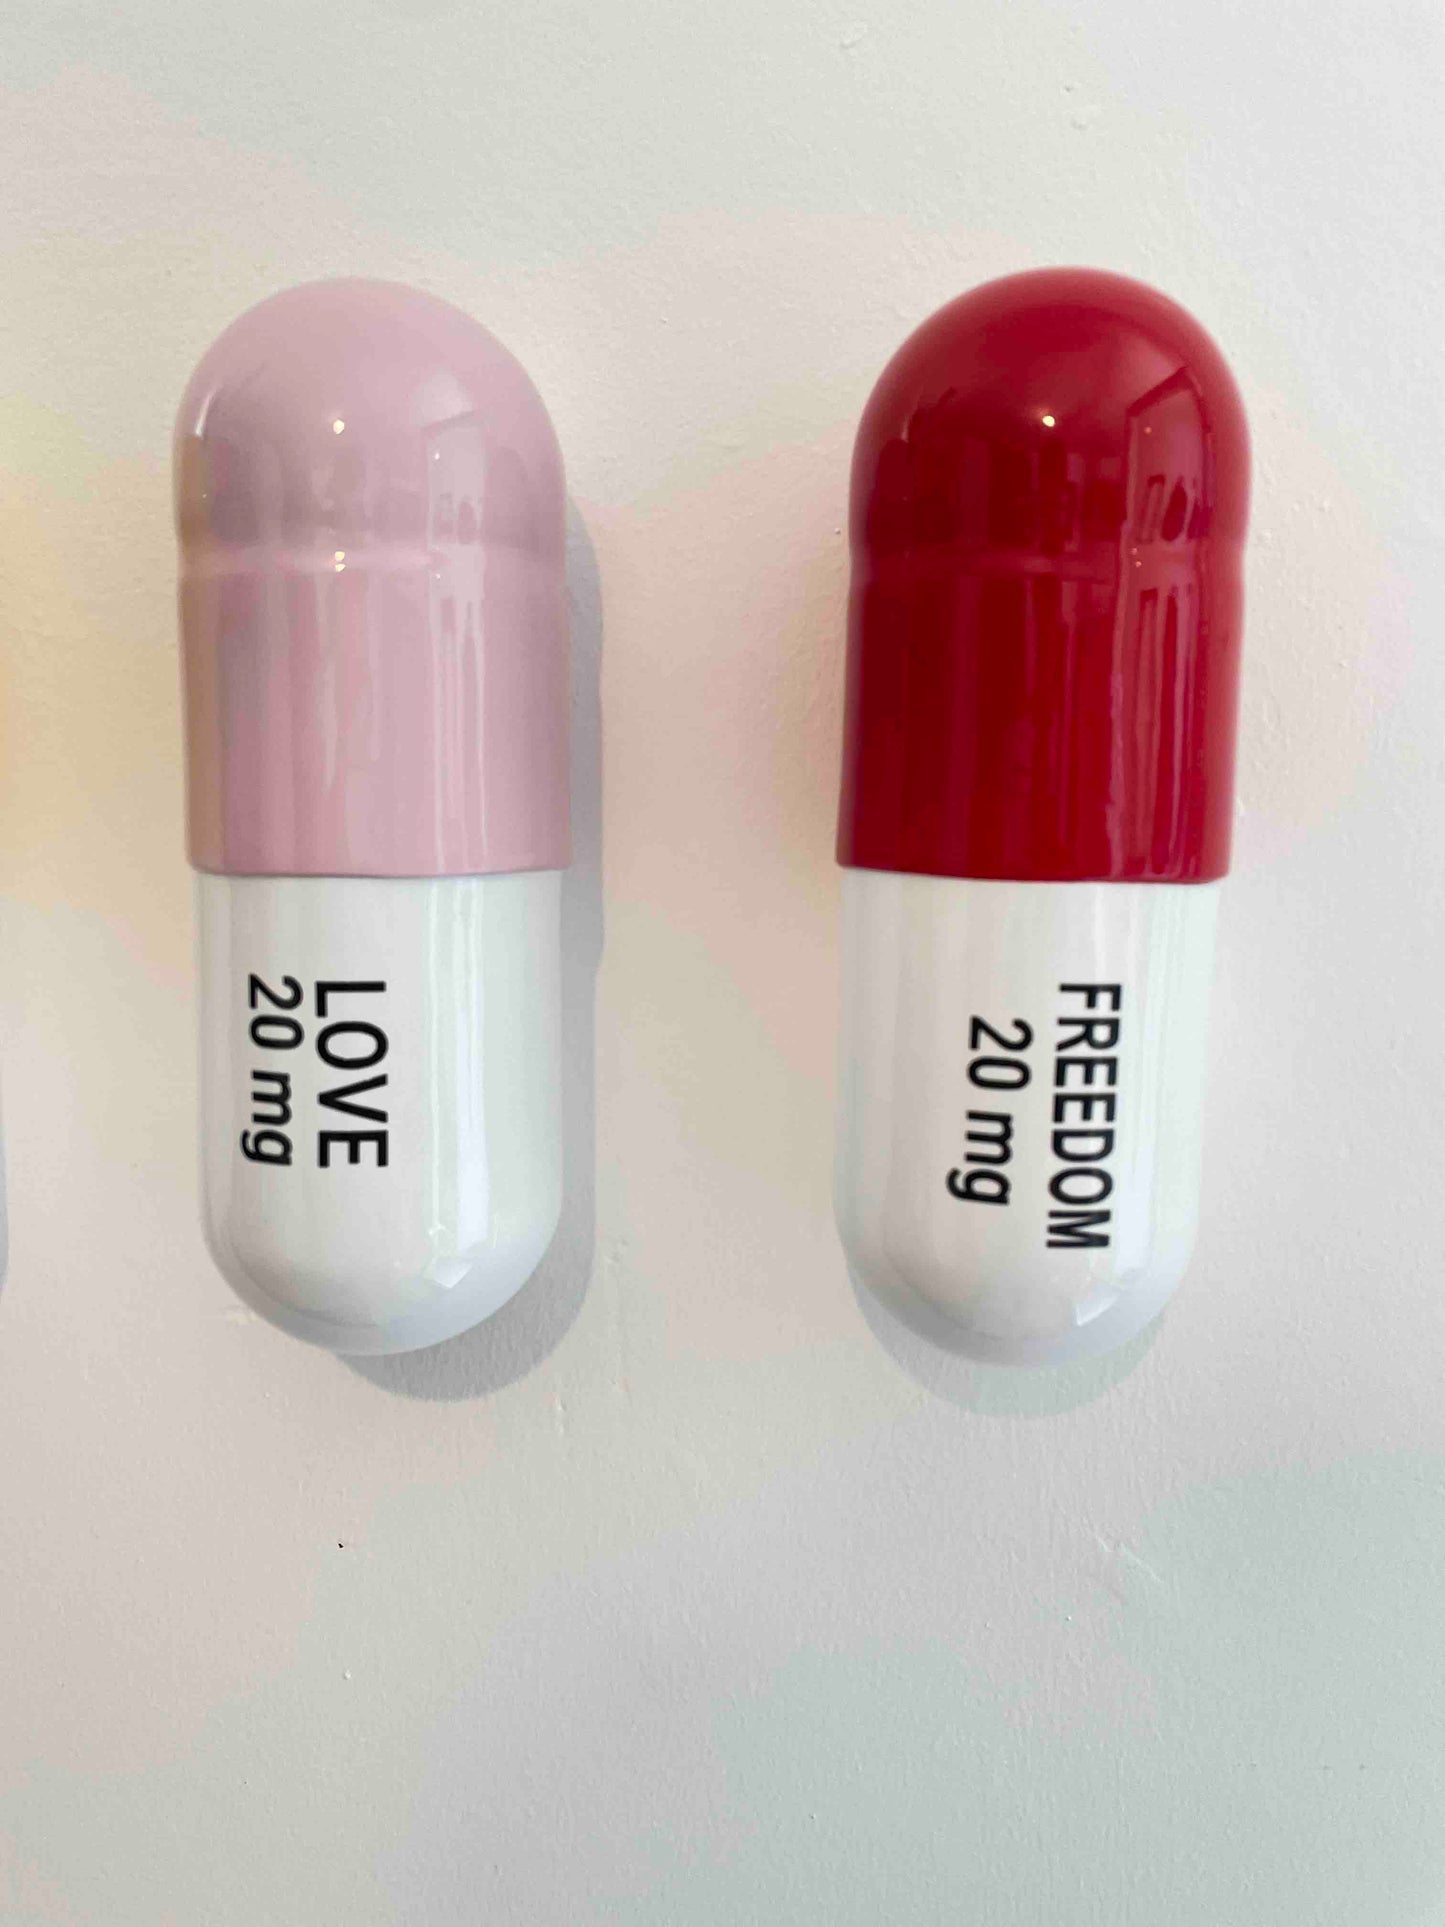 20 MG Happy pill Combo (pink, yellow and red) - figurative sculpture